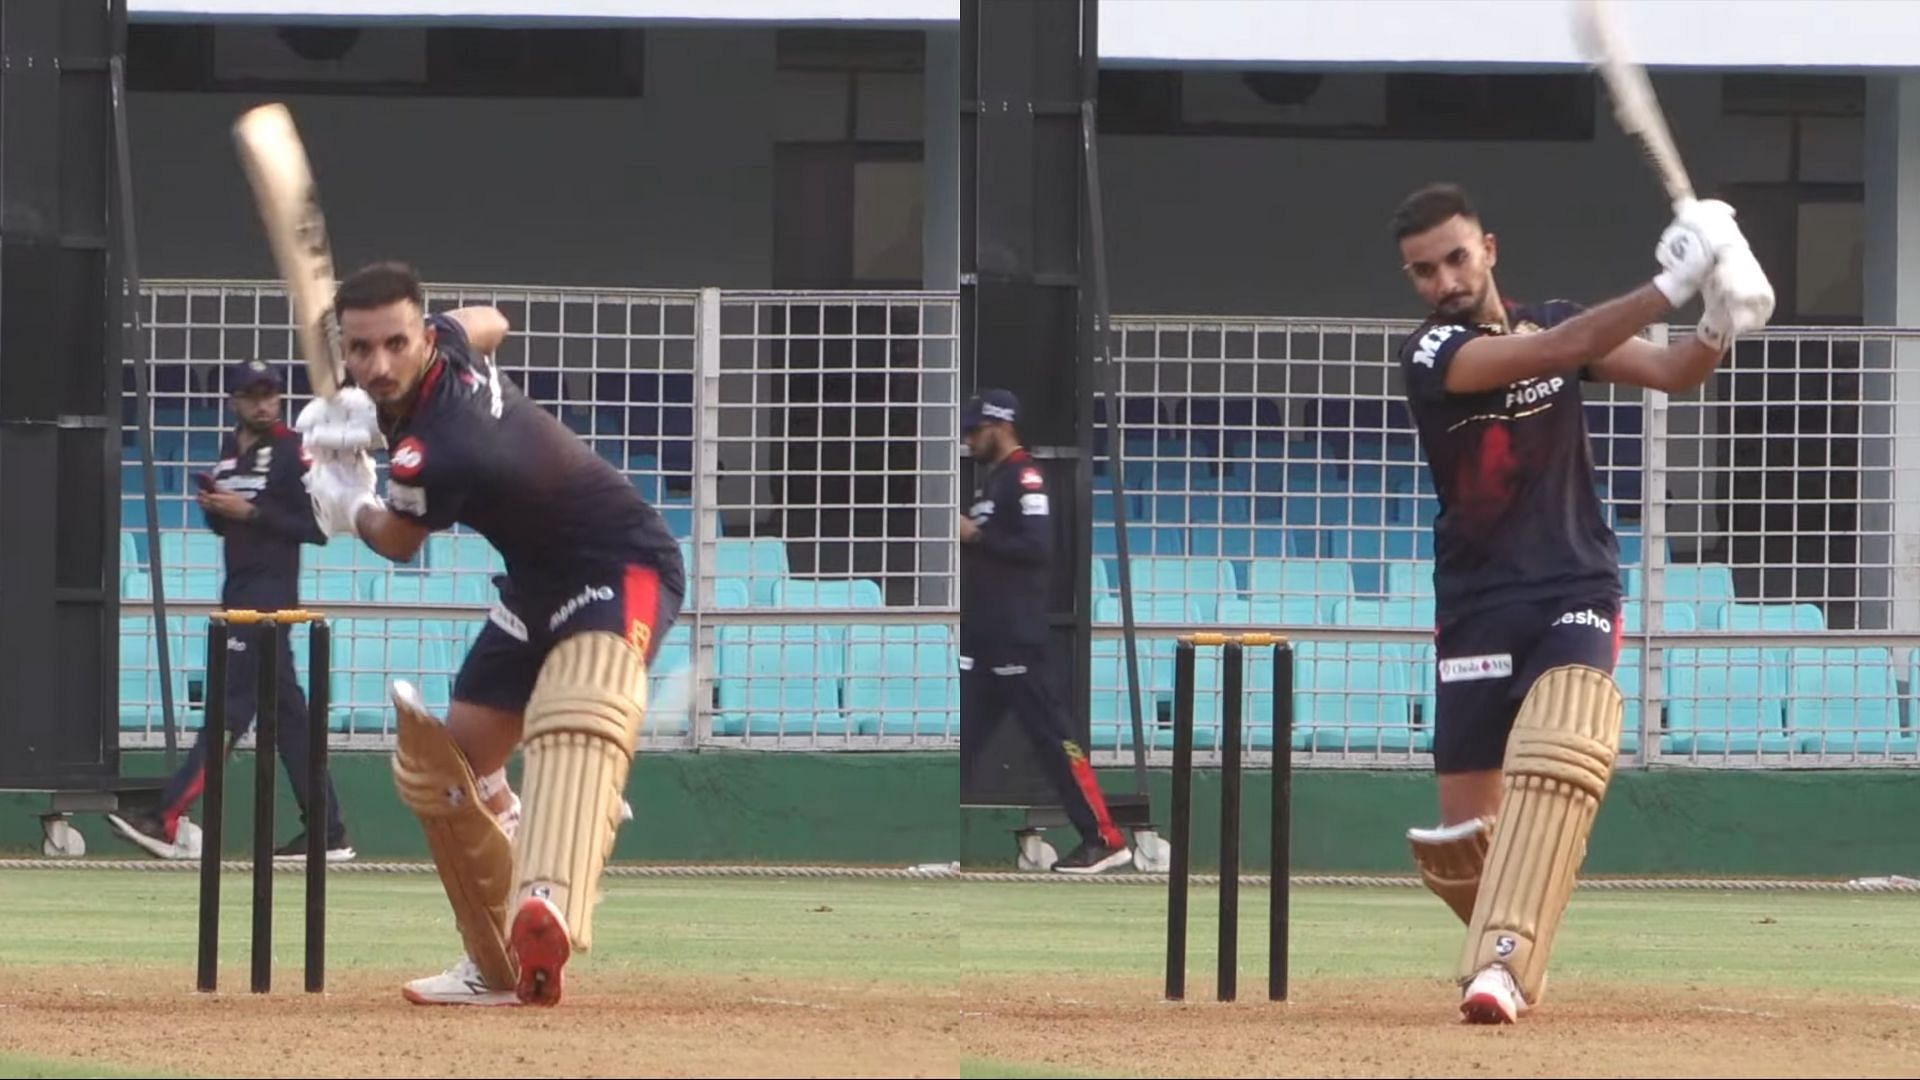 Harshal Patel has been working hard on his batting skills in the training sessions. (Image Source: RCB/YouTube)